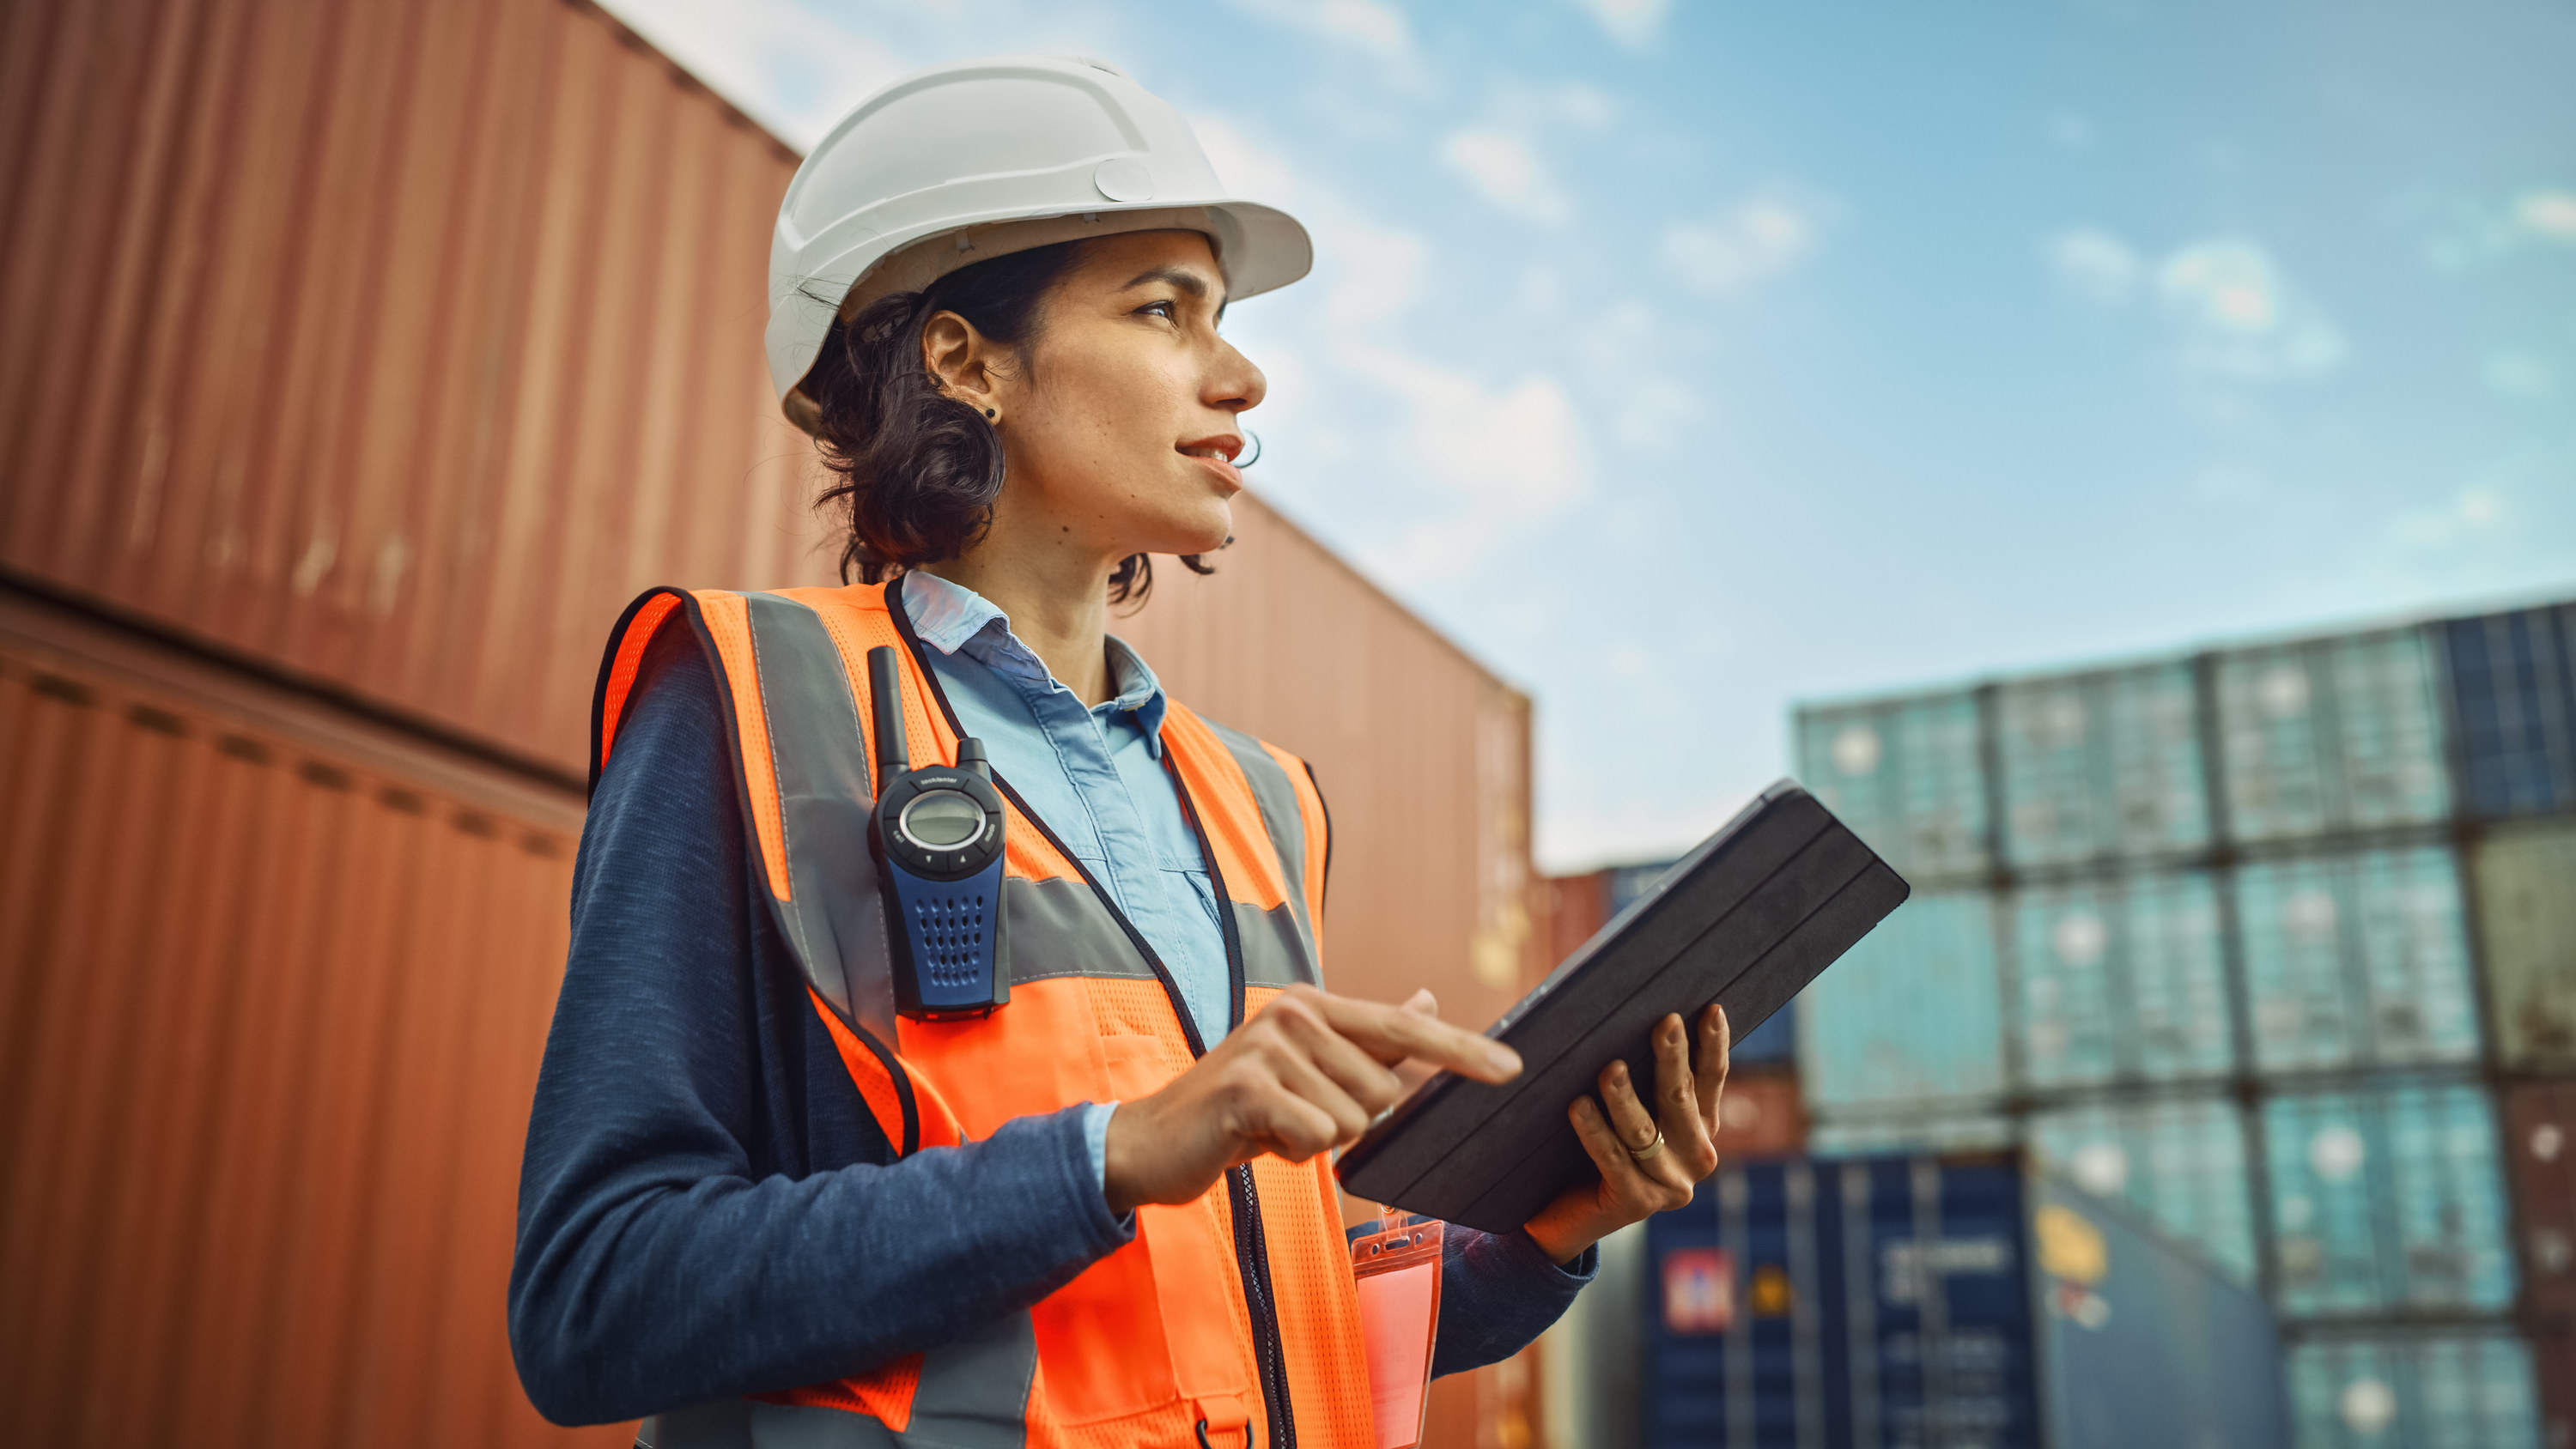 A woman wearing a hard hat and using an iPad